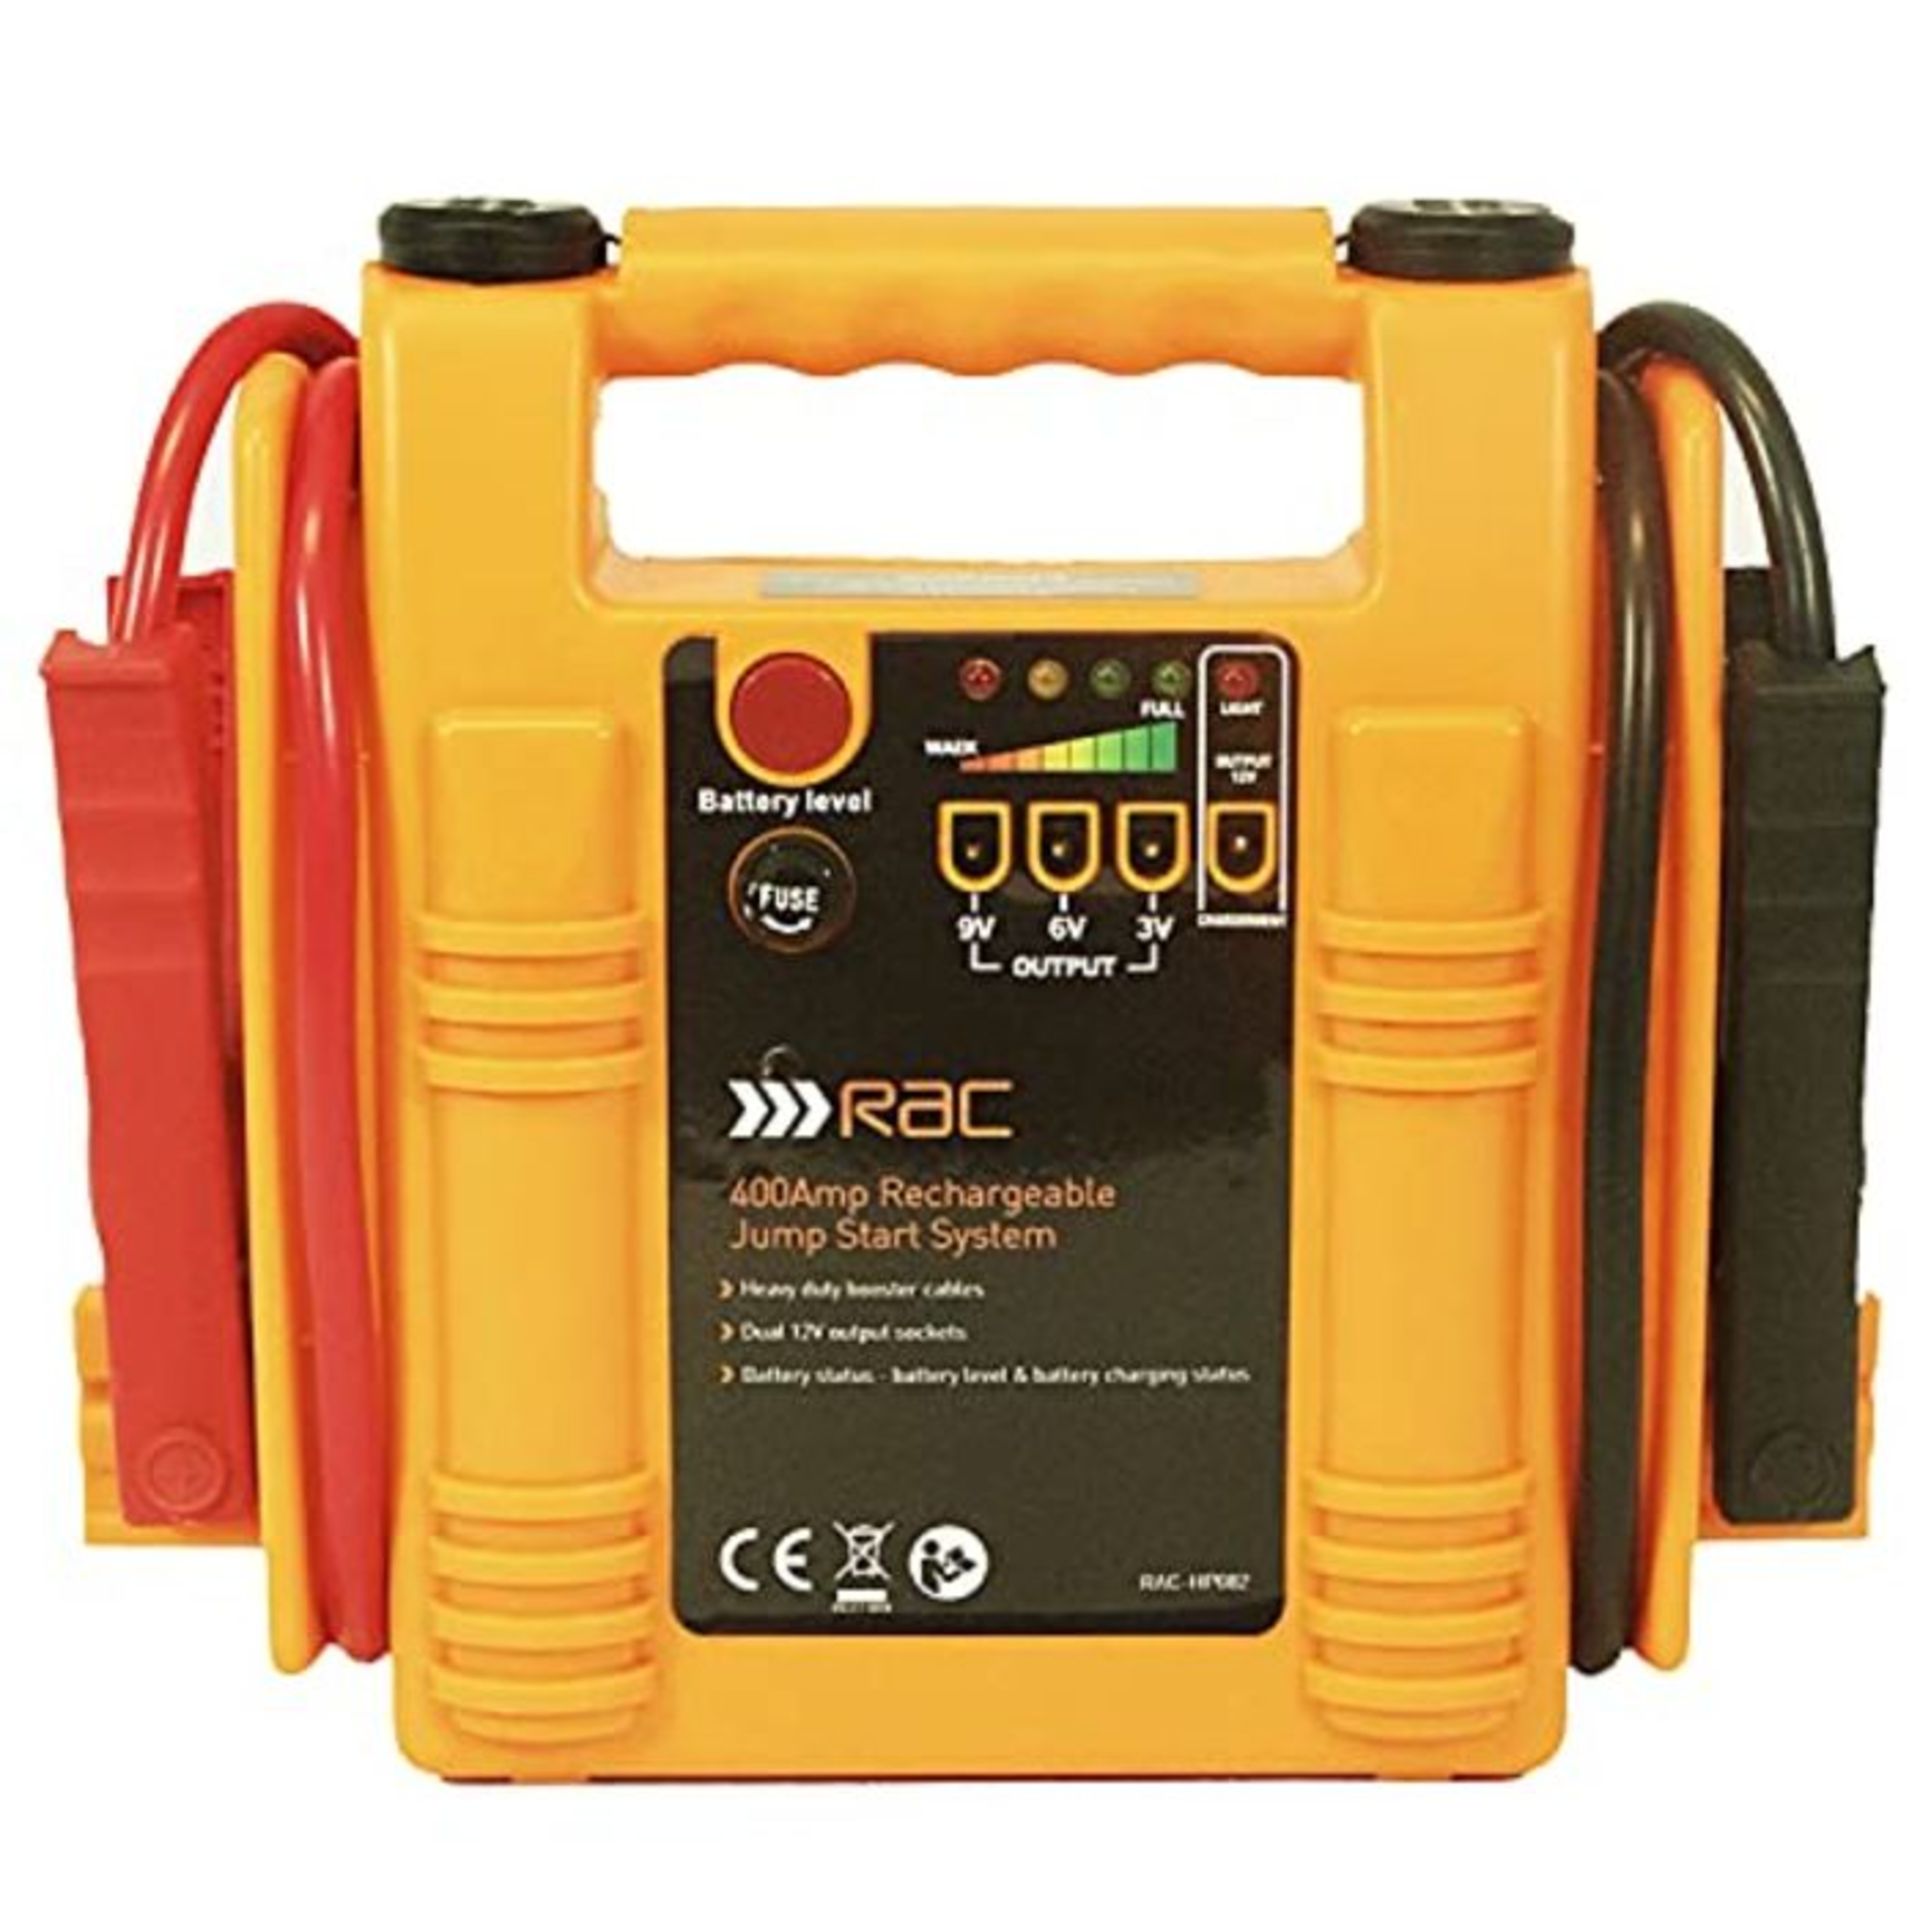 RAC 400 Amp Rechargeable Jump Start System HP082 - For Car Batteries up to 1500cc Petr